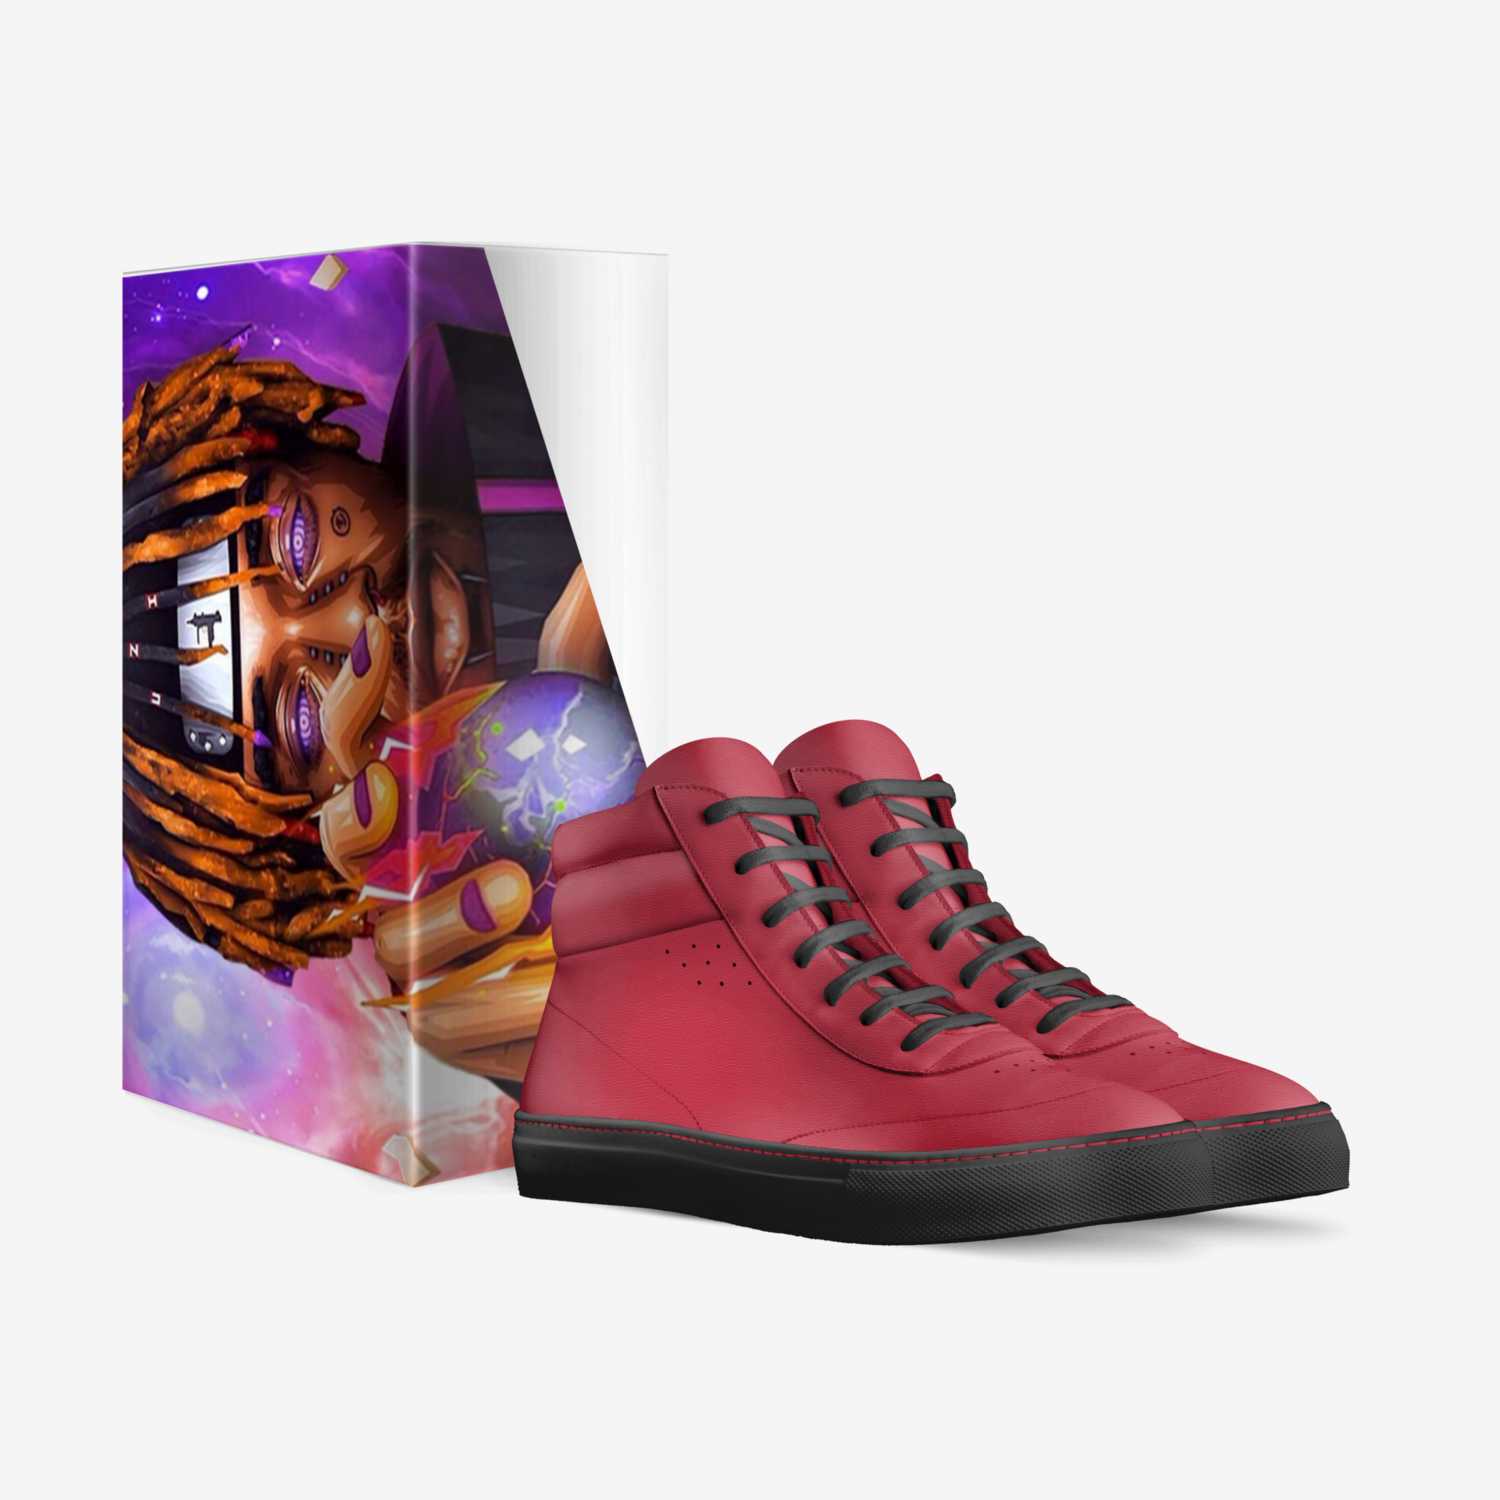 LIL UZI 3 custom made in Italy shoes by Mcrae Tomlinson | Box view